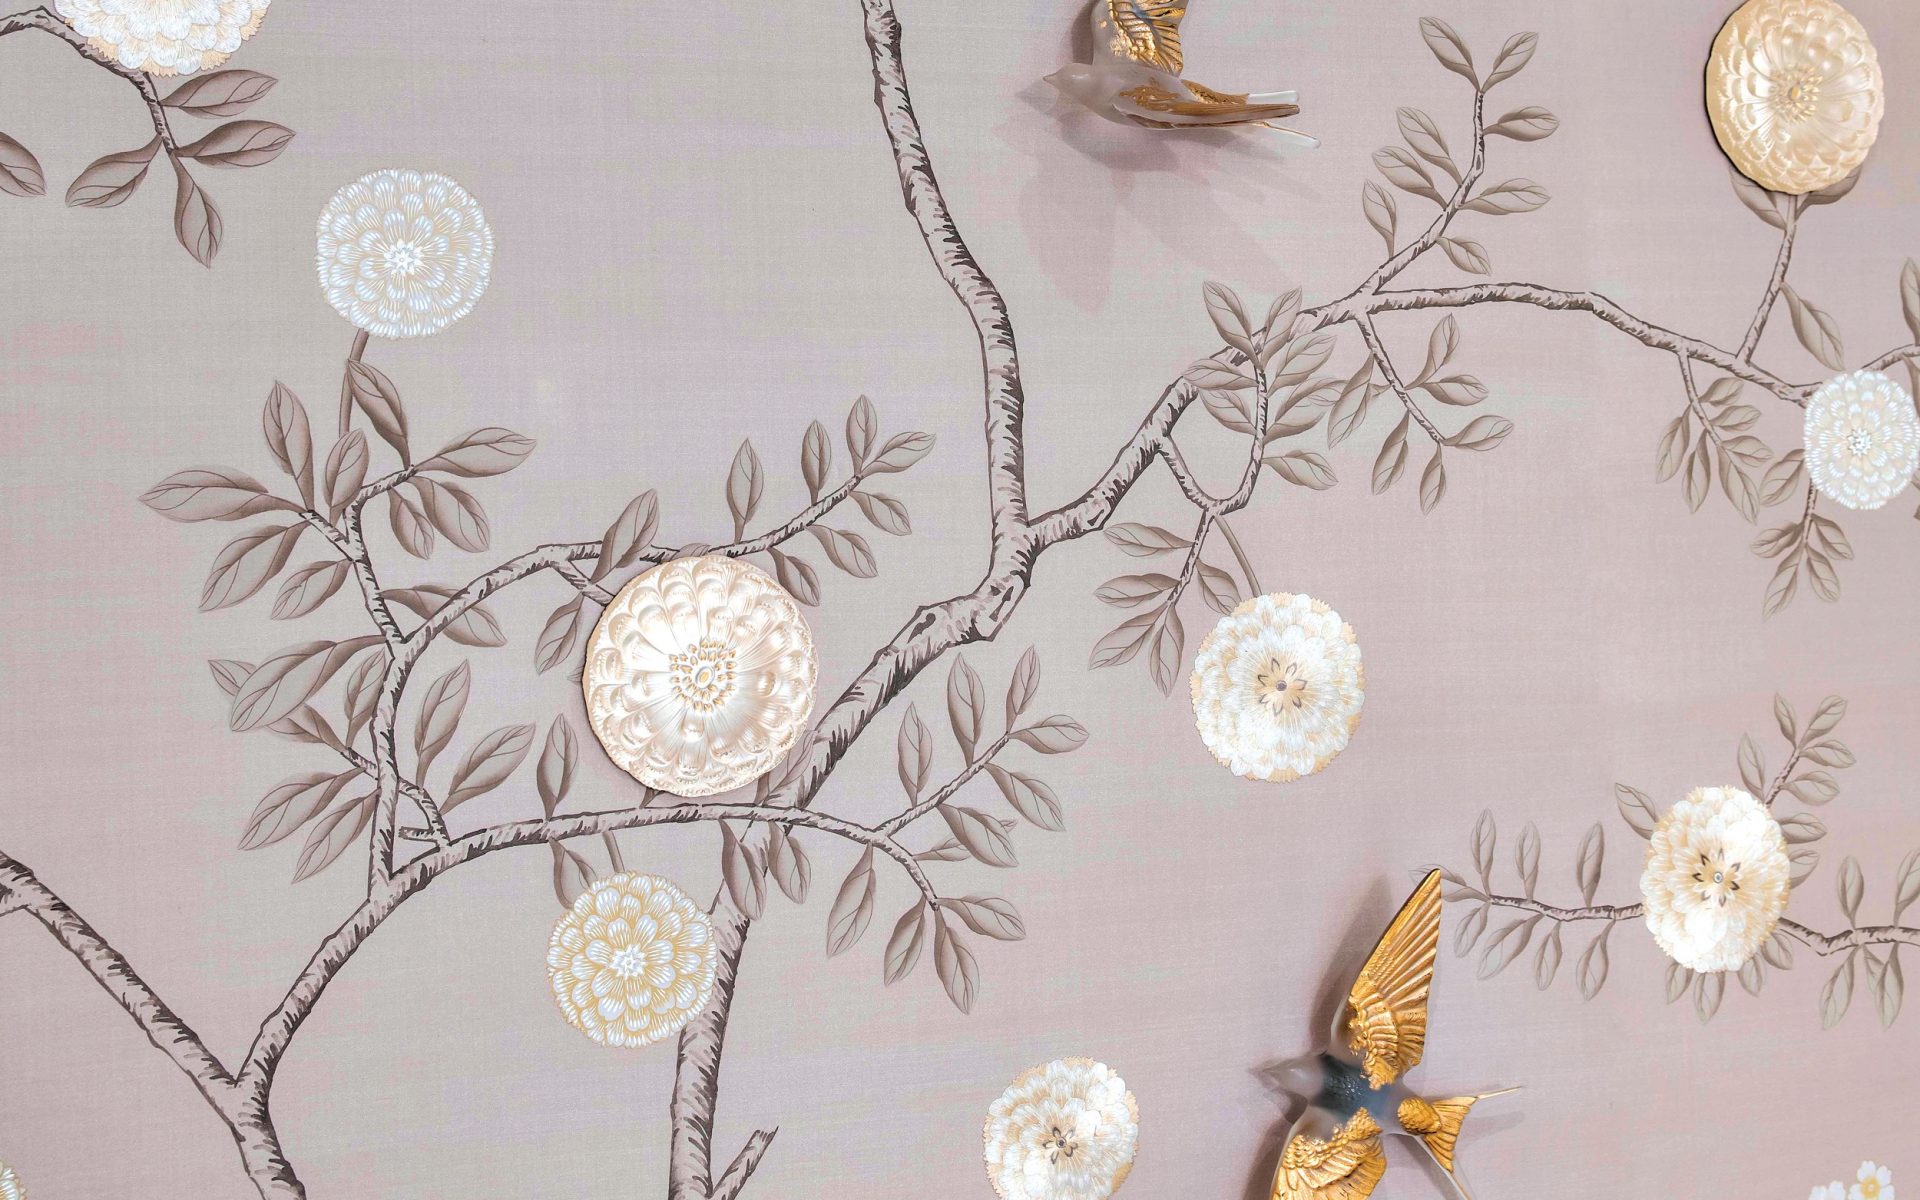 Lalique and Fromental Collaborate on a Stunning Wallpaper Design  Galerie